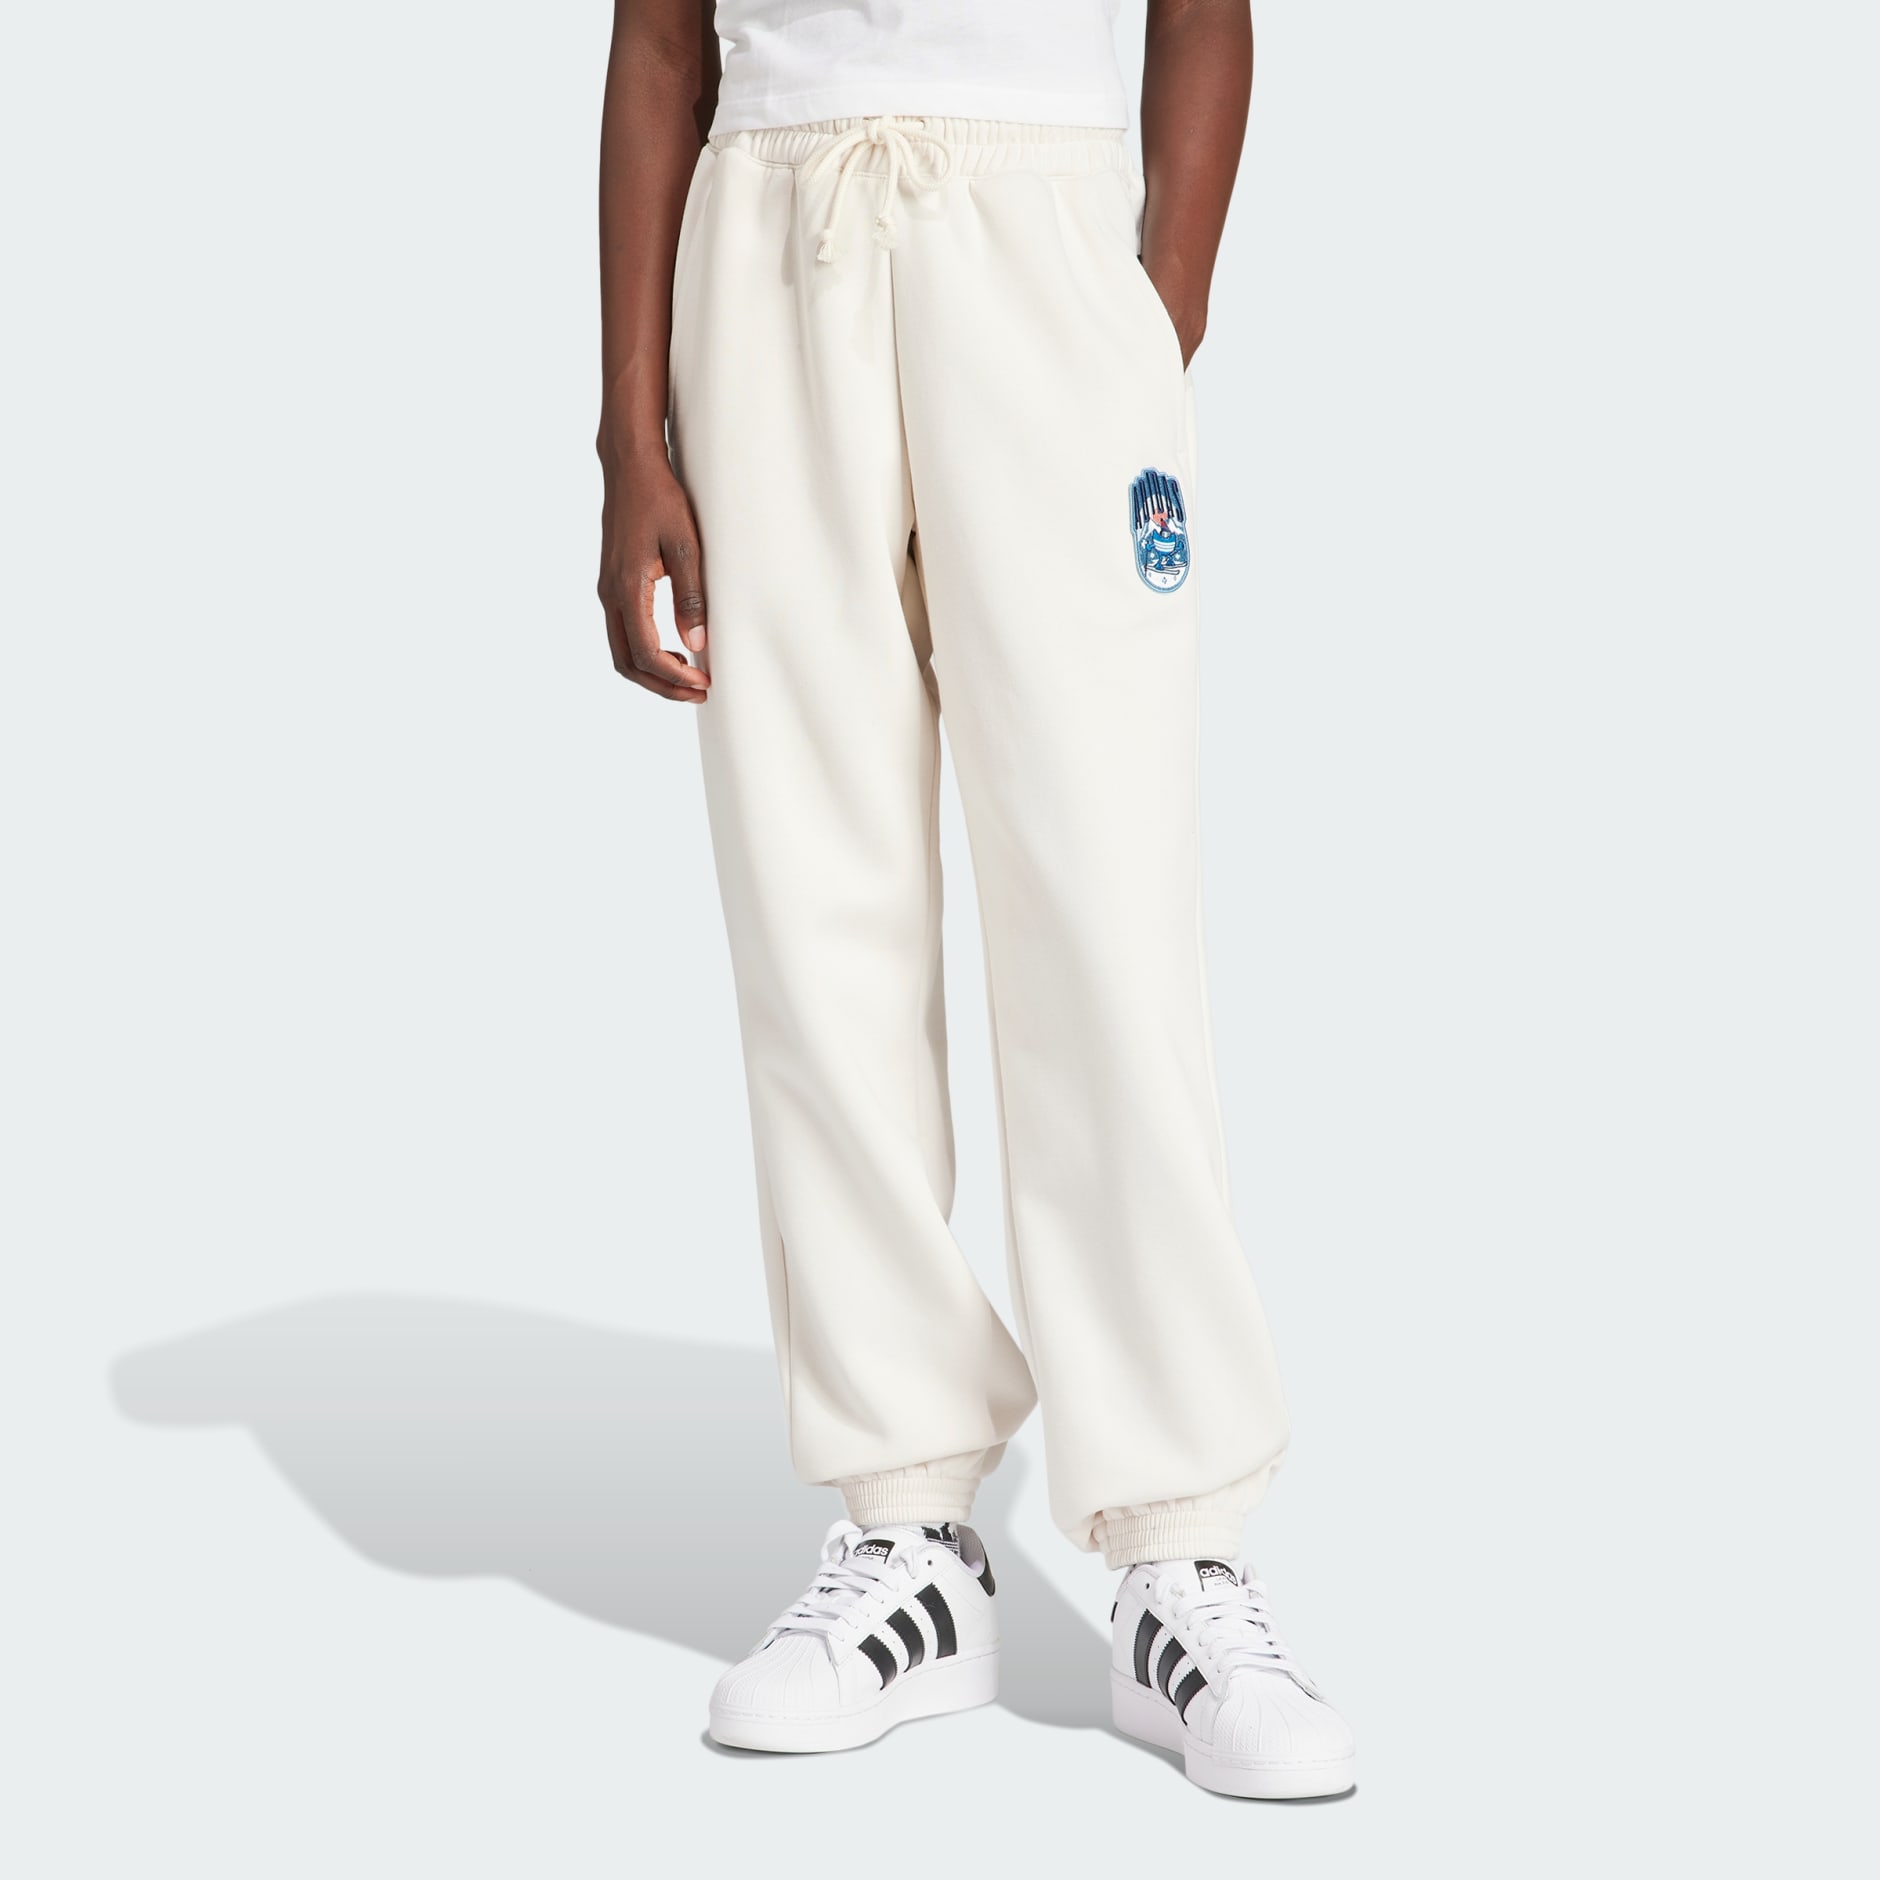 adidas Holiday Sweat Pants (Gender Neutral) - White